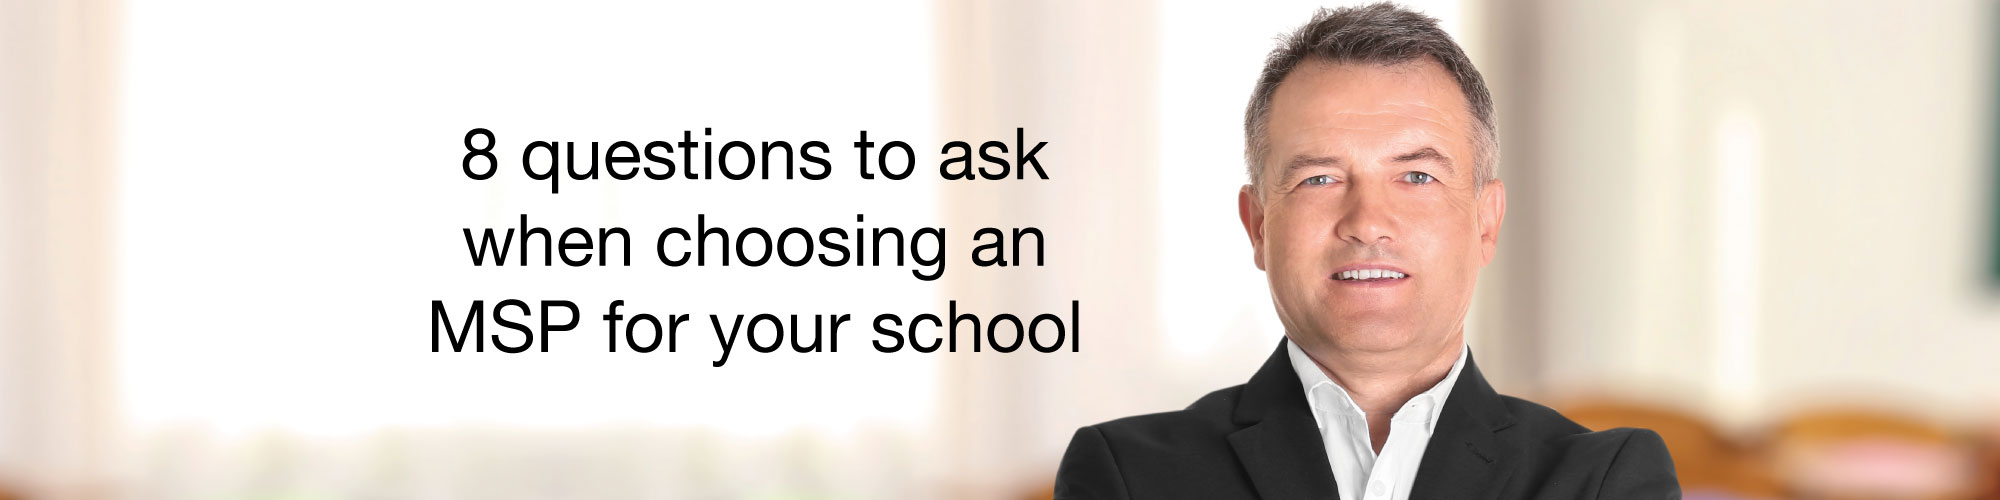 8-Questions-for-MSPs-for-Schools-1